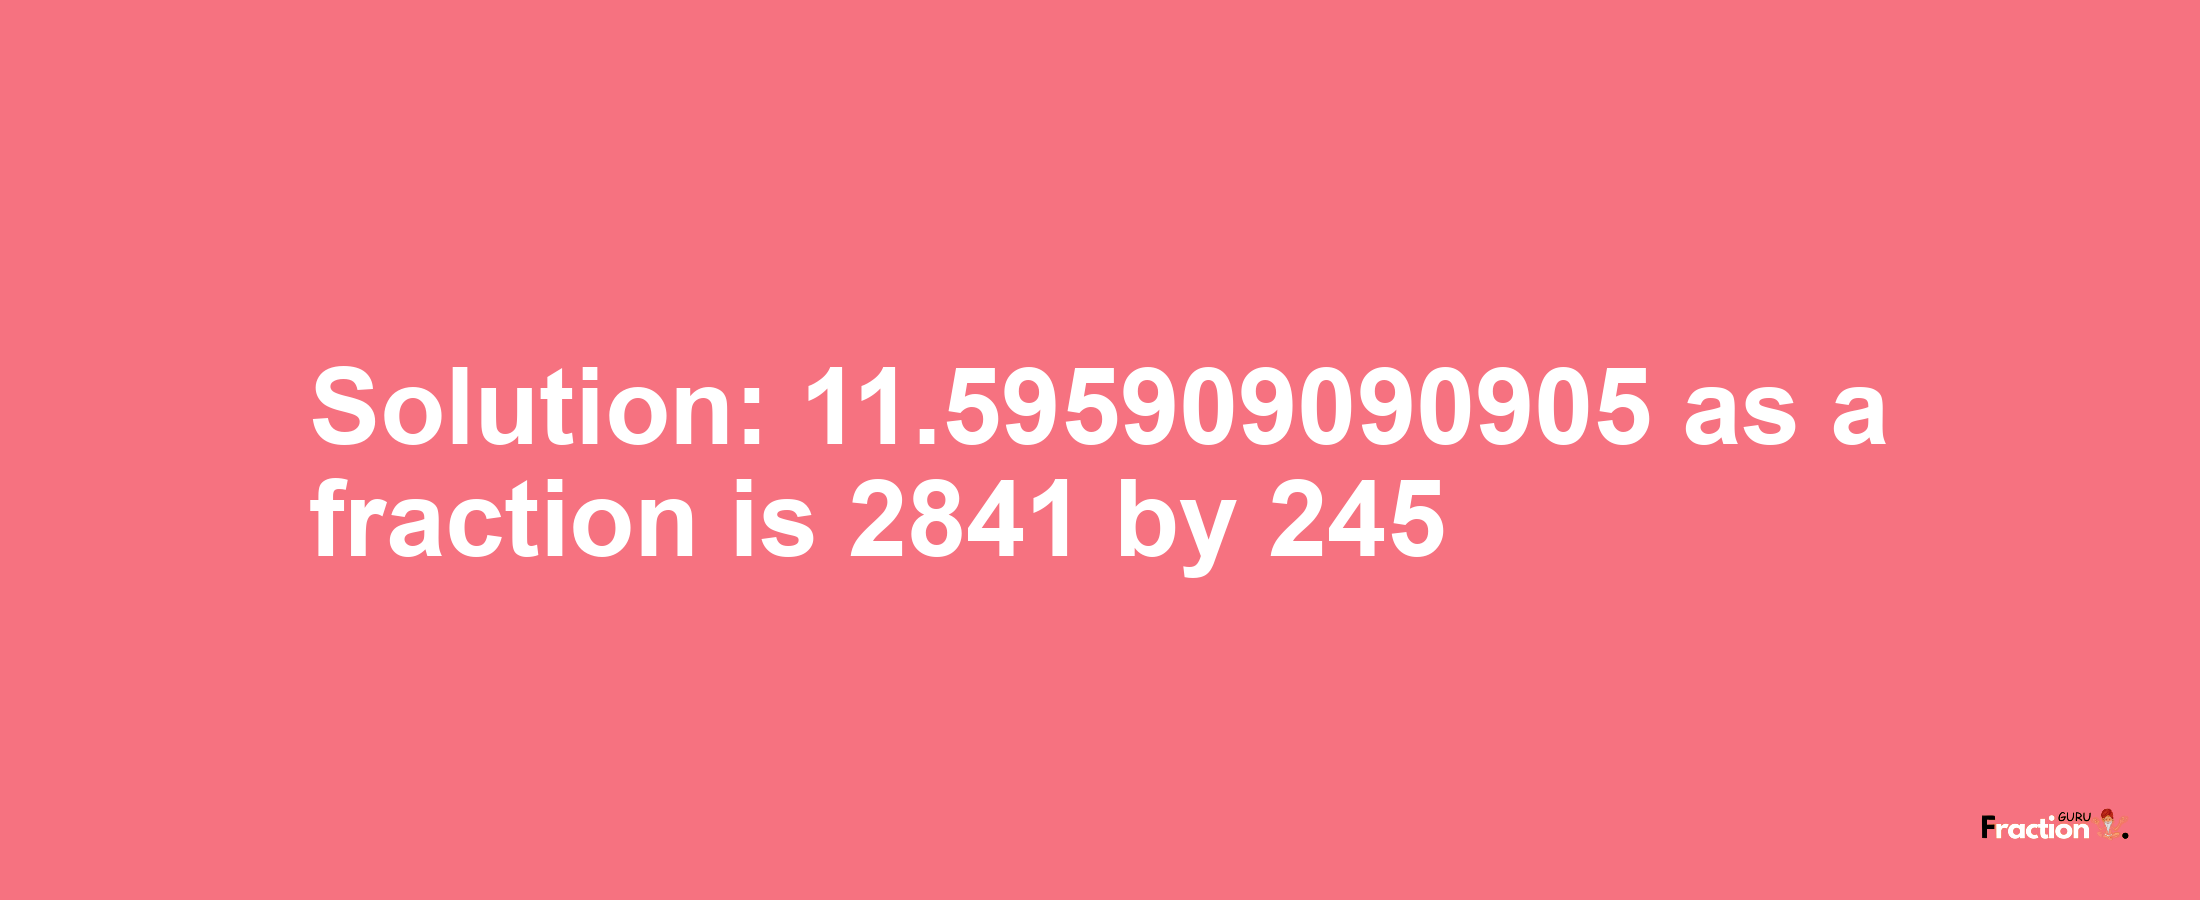 Solution:11.595909090905 as a fraction is 2841/245